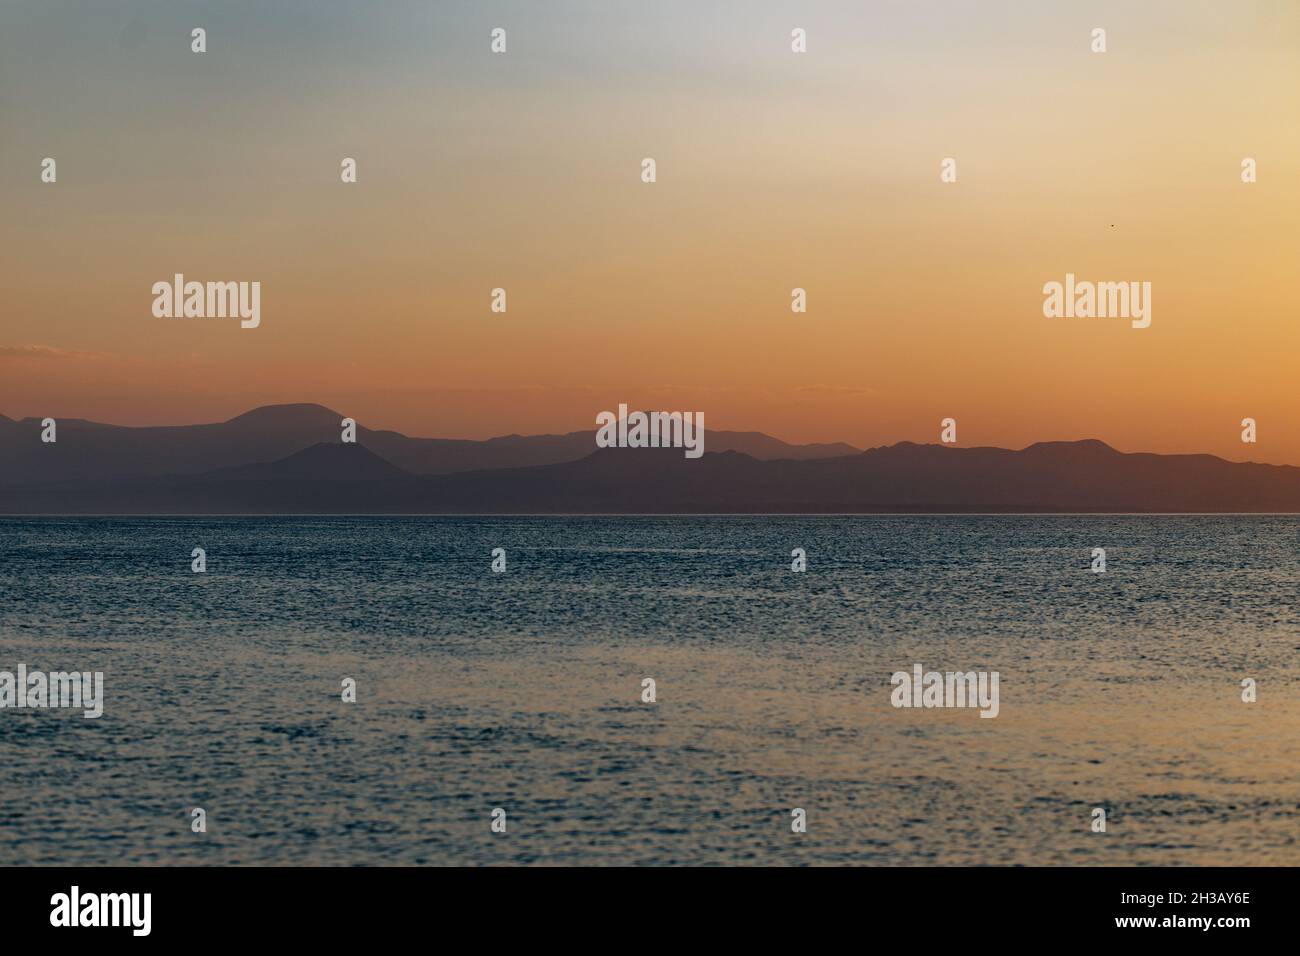 Stunning view of Lake Sevan with the silhouette of mountain range layers in the background at sunset Stock Photo